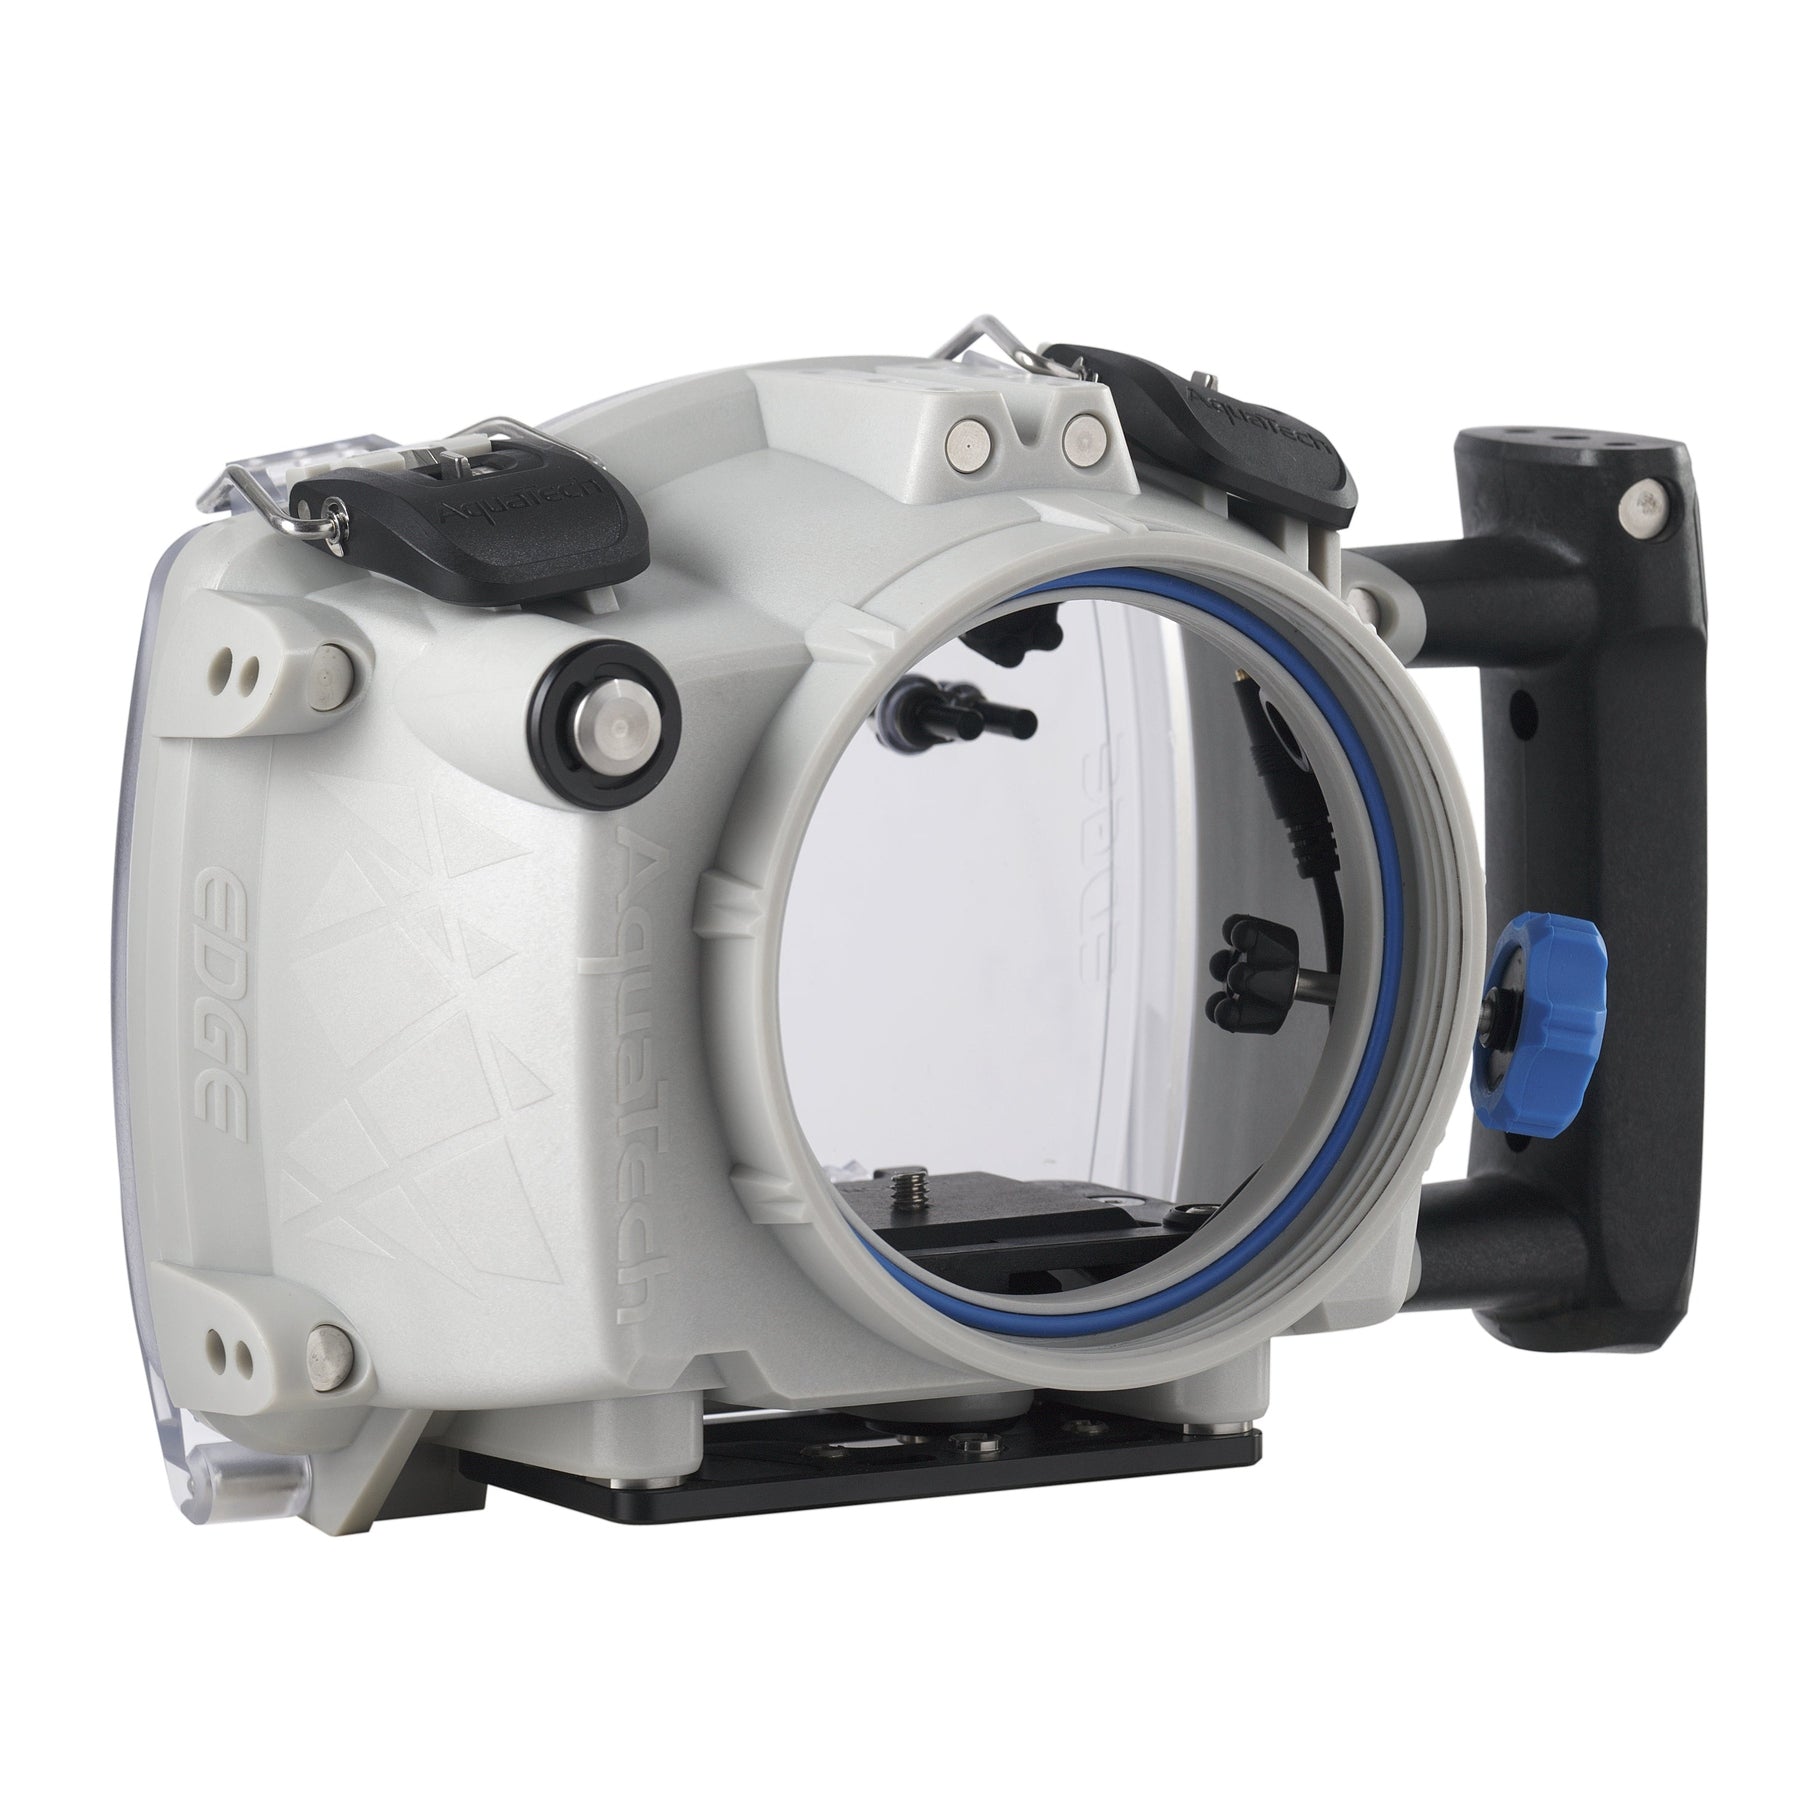 EDGE Pro Water Housing for Sony a7R IV / a1 / a7S III / a9 II 